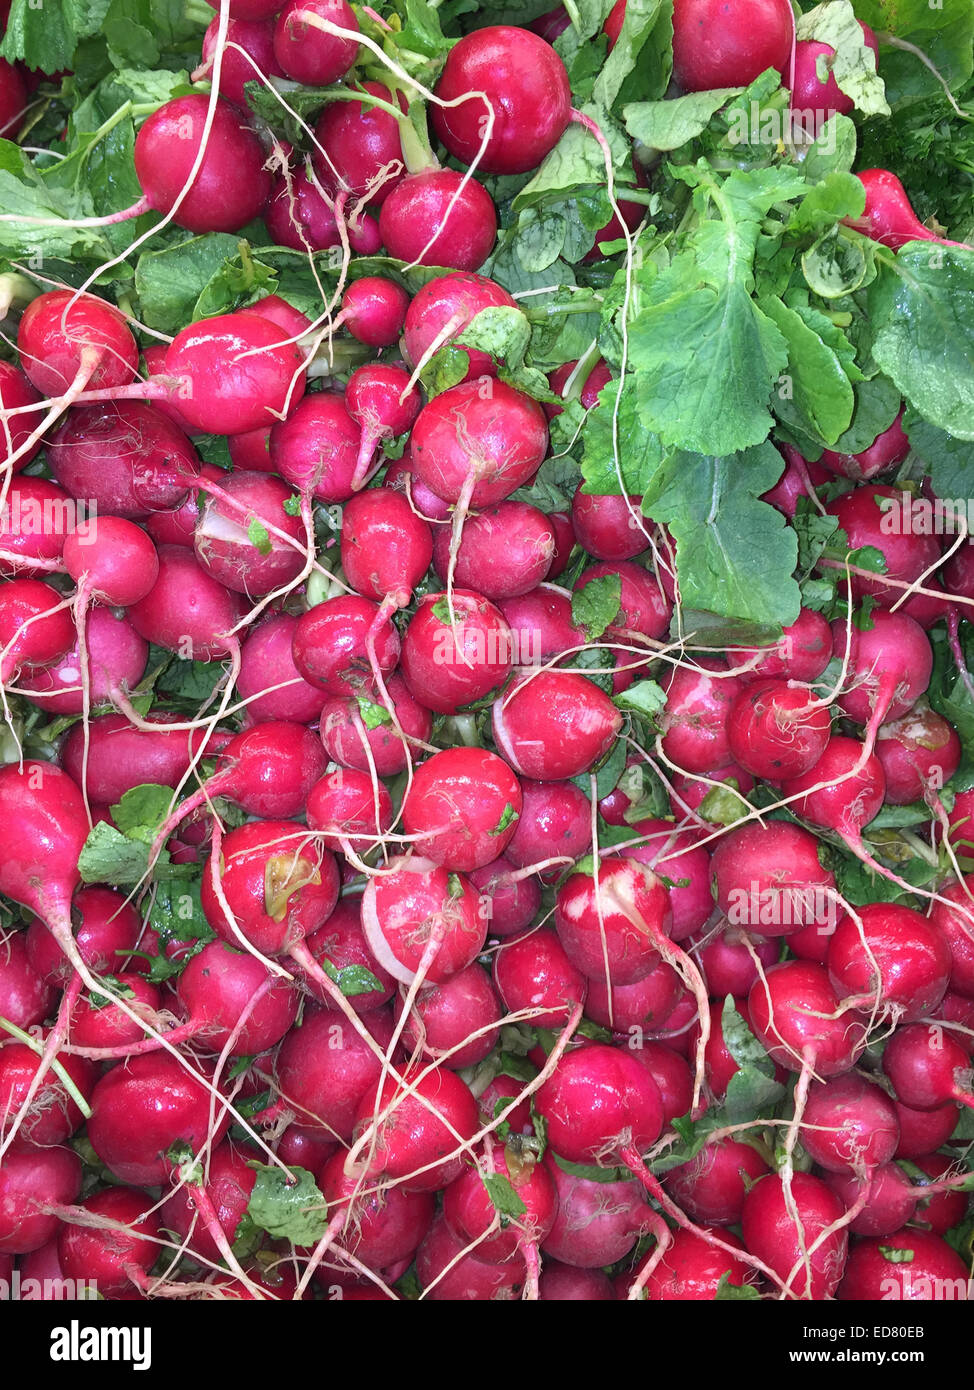 Fresh, crisp red radishes for sale at a local farmers market product stand Stock Photo